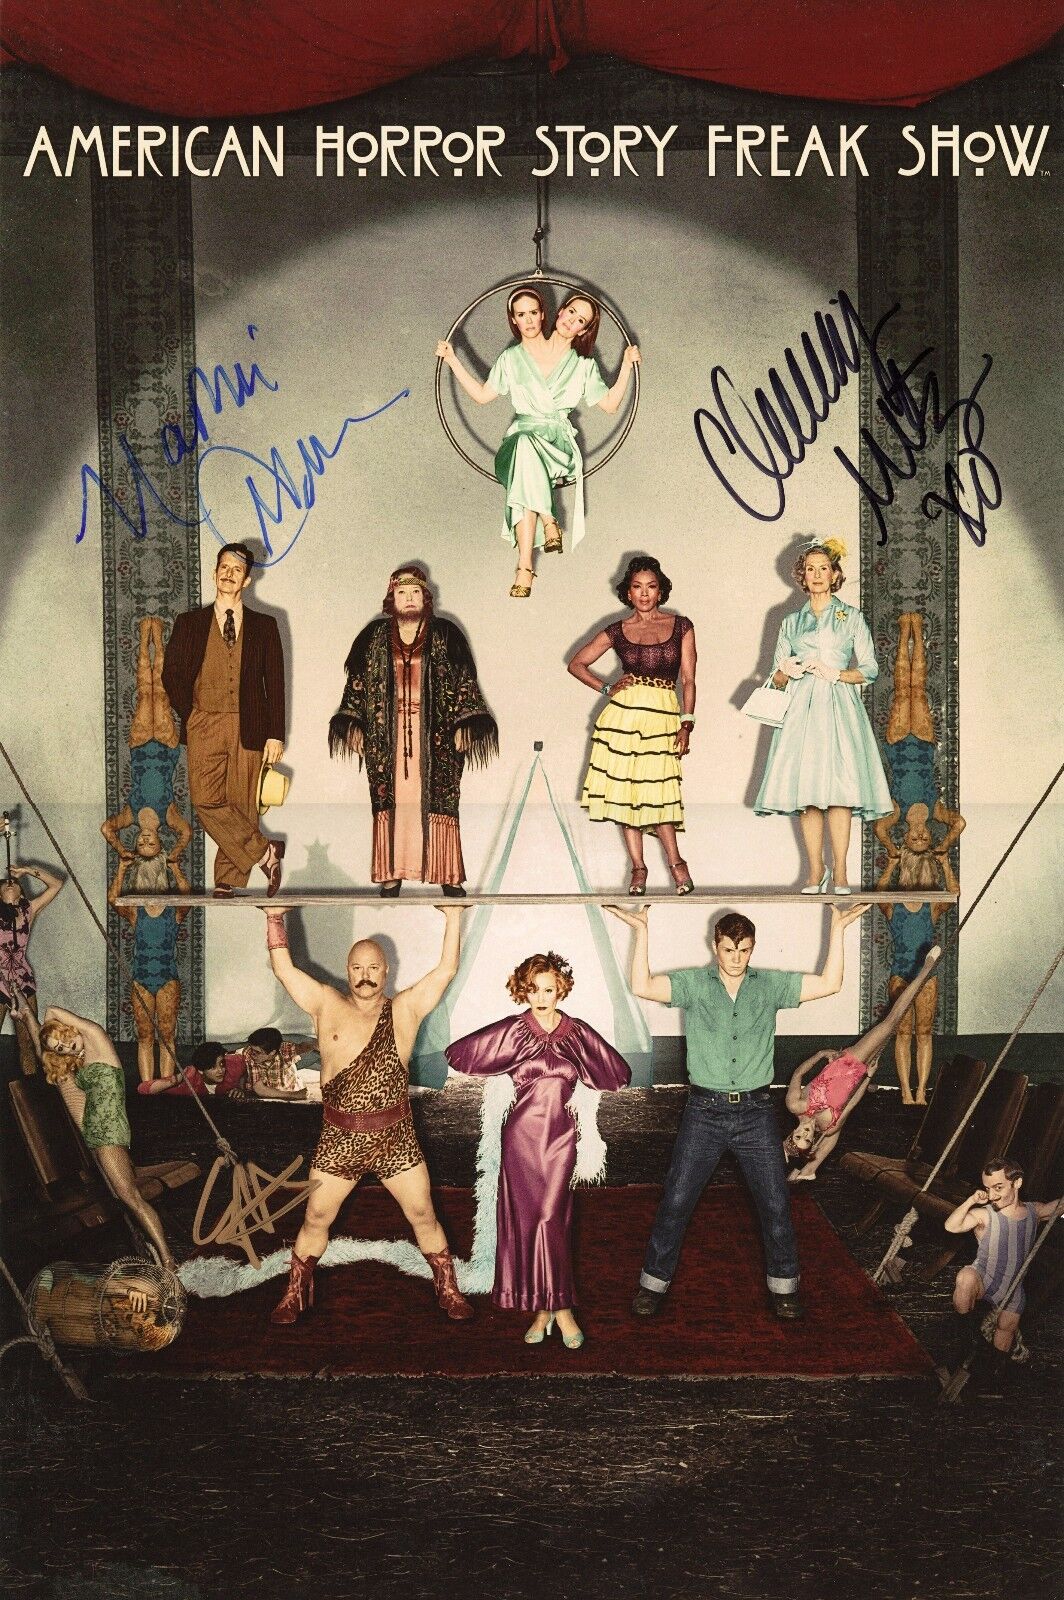 EVANS PETERS+2 Hand-Signed AMERICAN HORROR STORY ~FREAK SHOW~11X17 Photo Poster painting (PROOF)